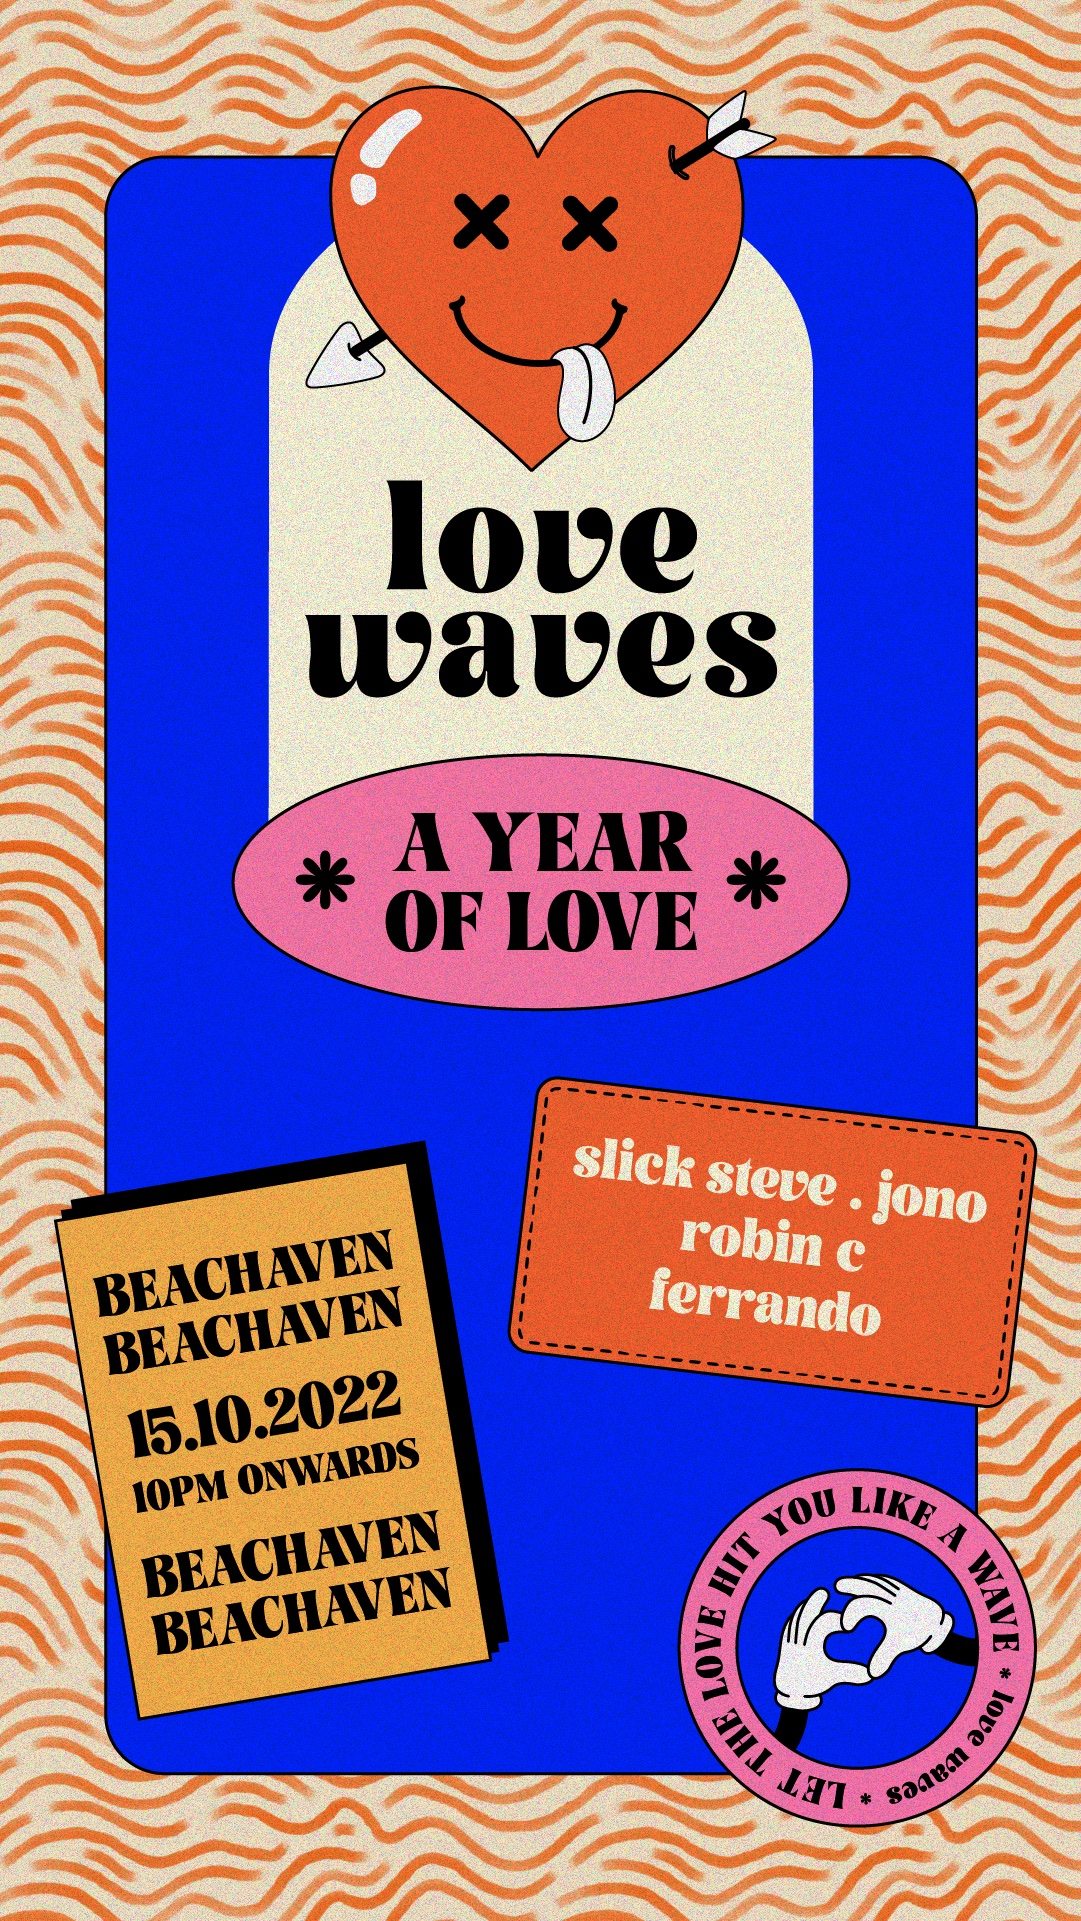 Love Waves: A Year of Love! poster